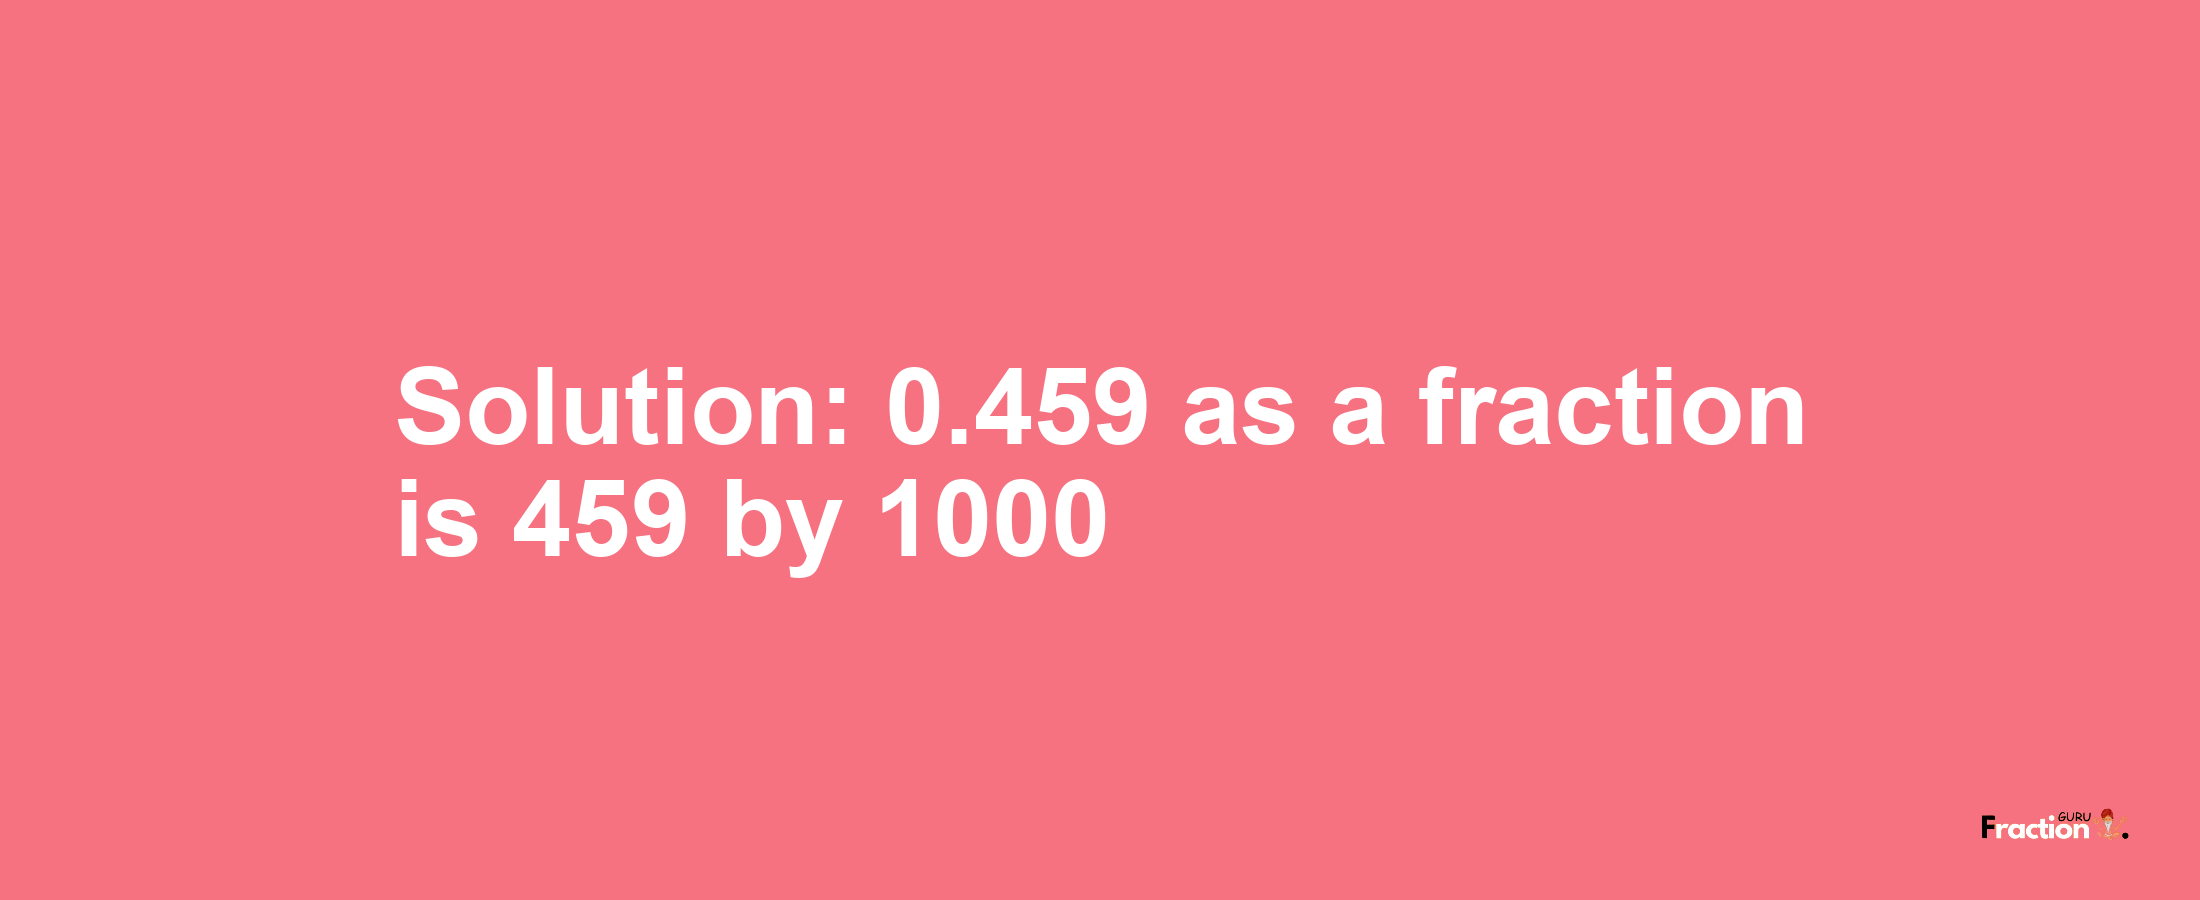 Solution:0.459 as a fraction is 459/1000